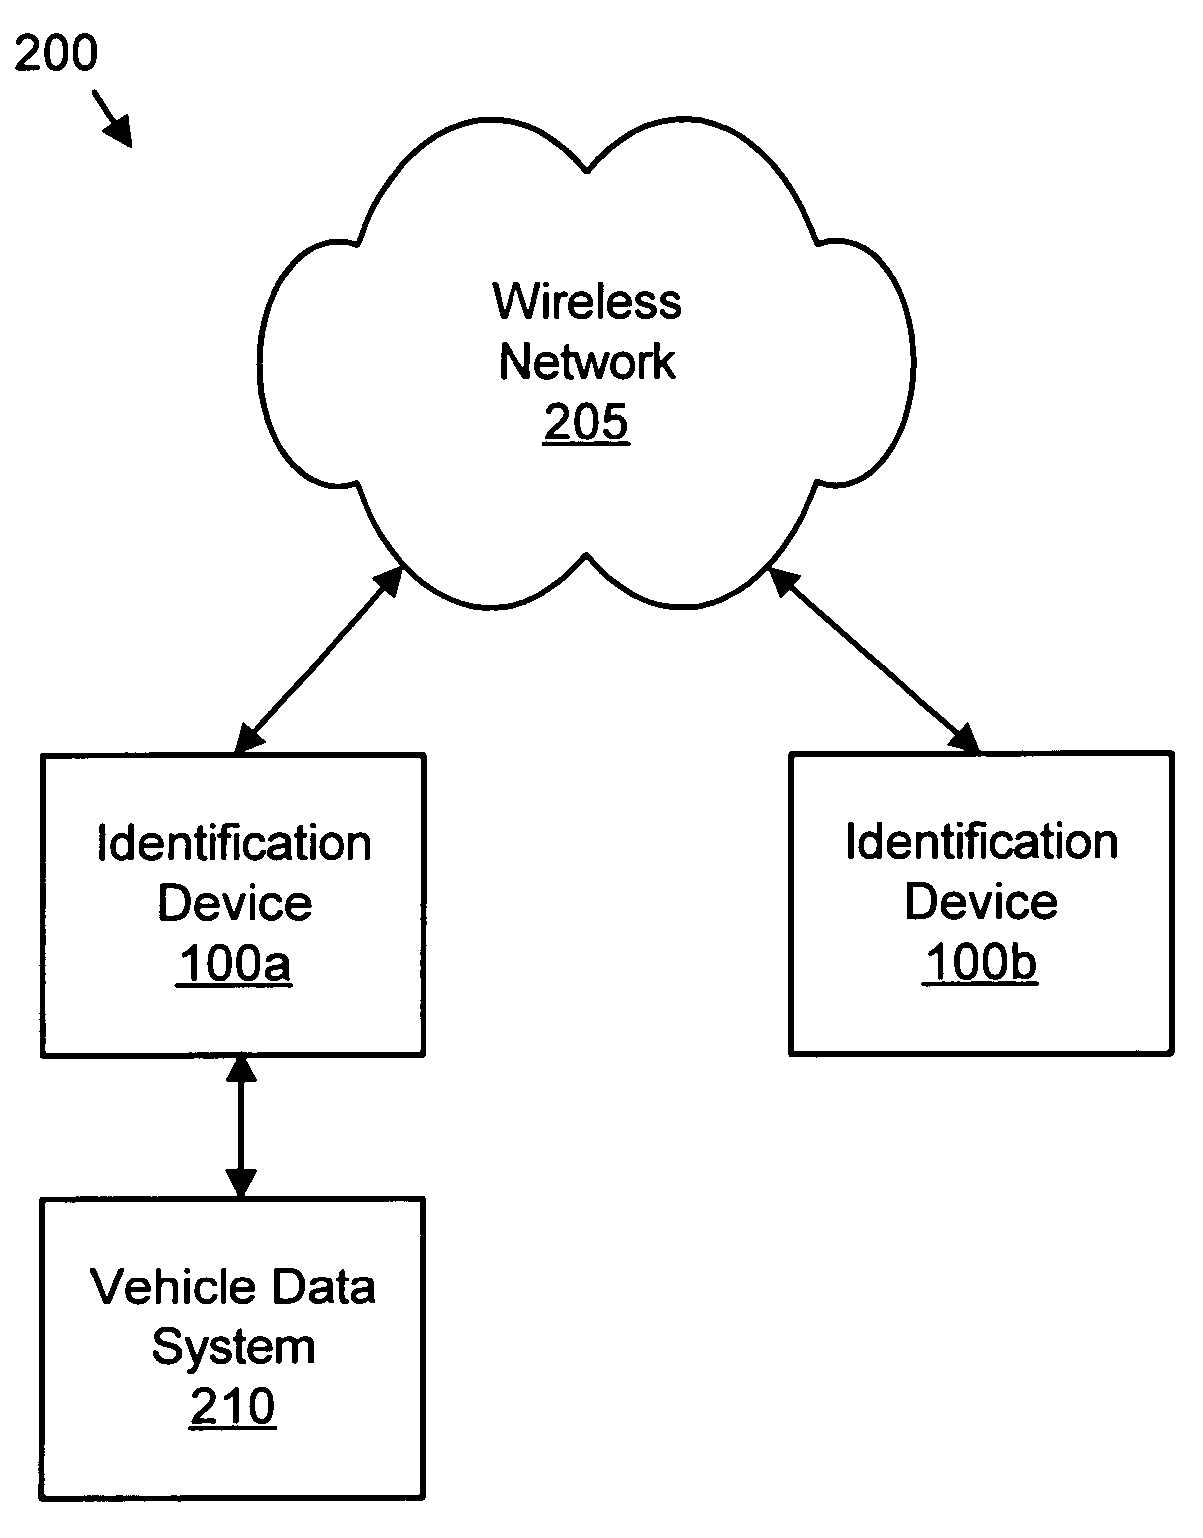 Apparatus, system, and method for exchanging vehicle identification data